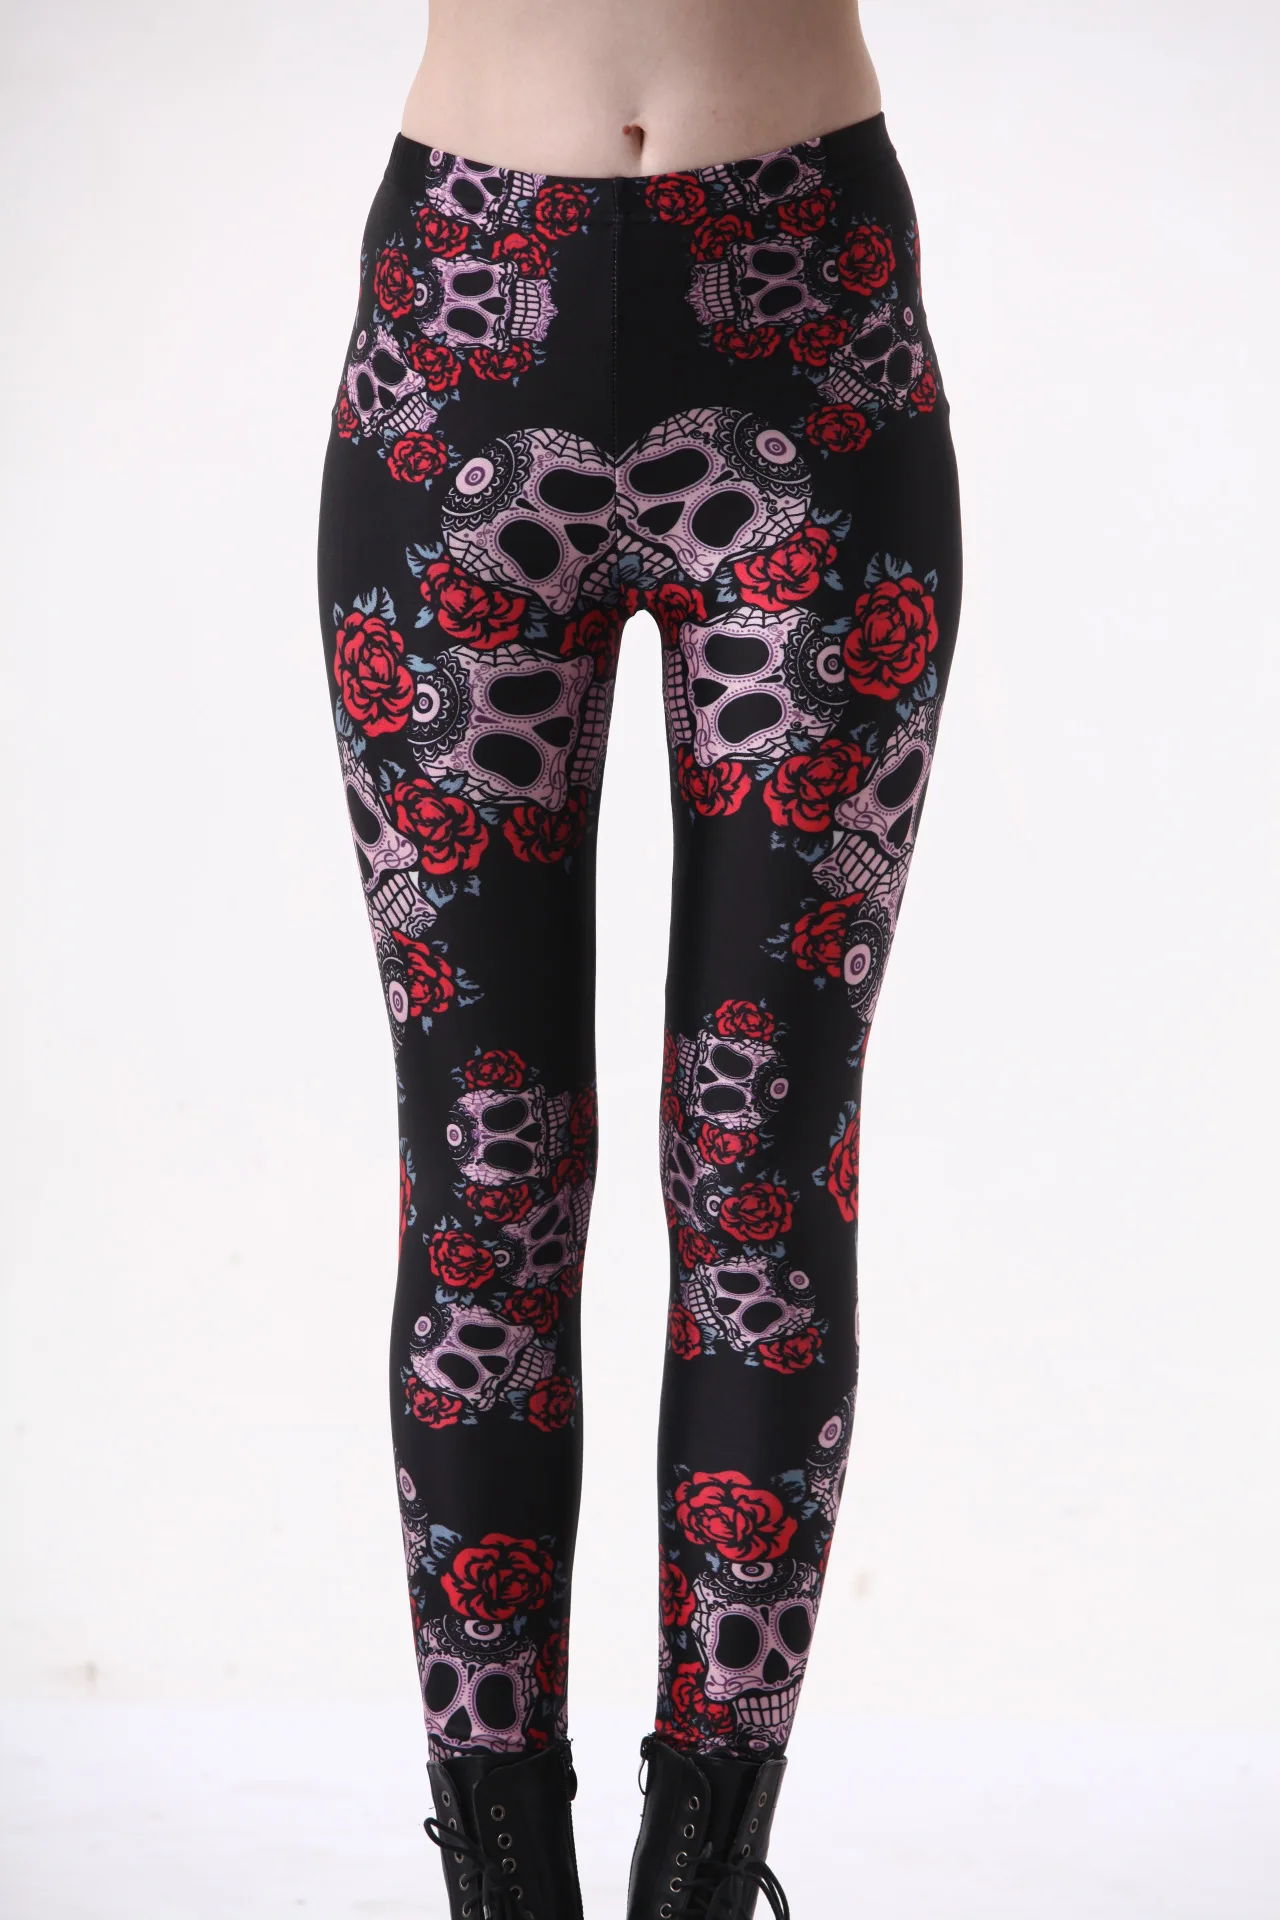 Wholesale Leggings In Bulk  International Society of Precision Agriculture